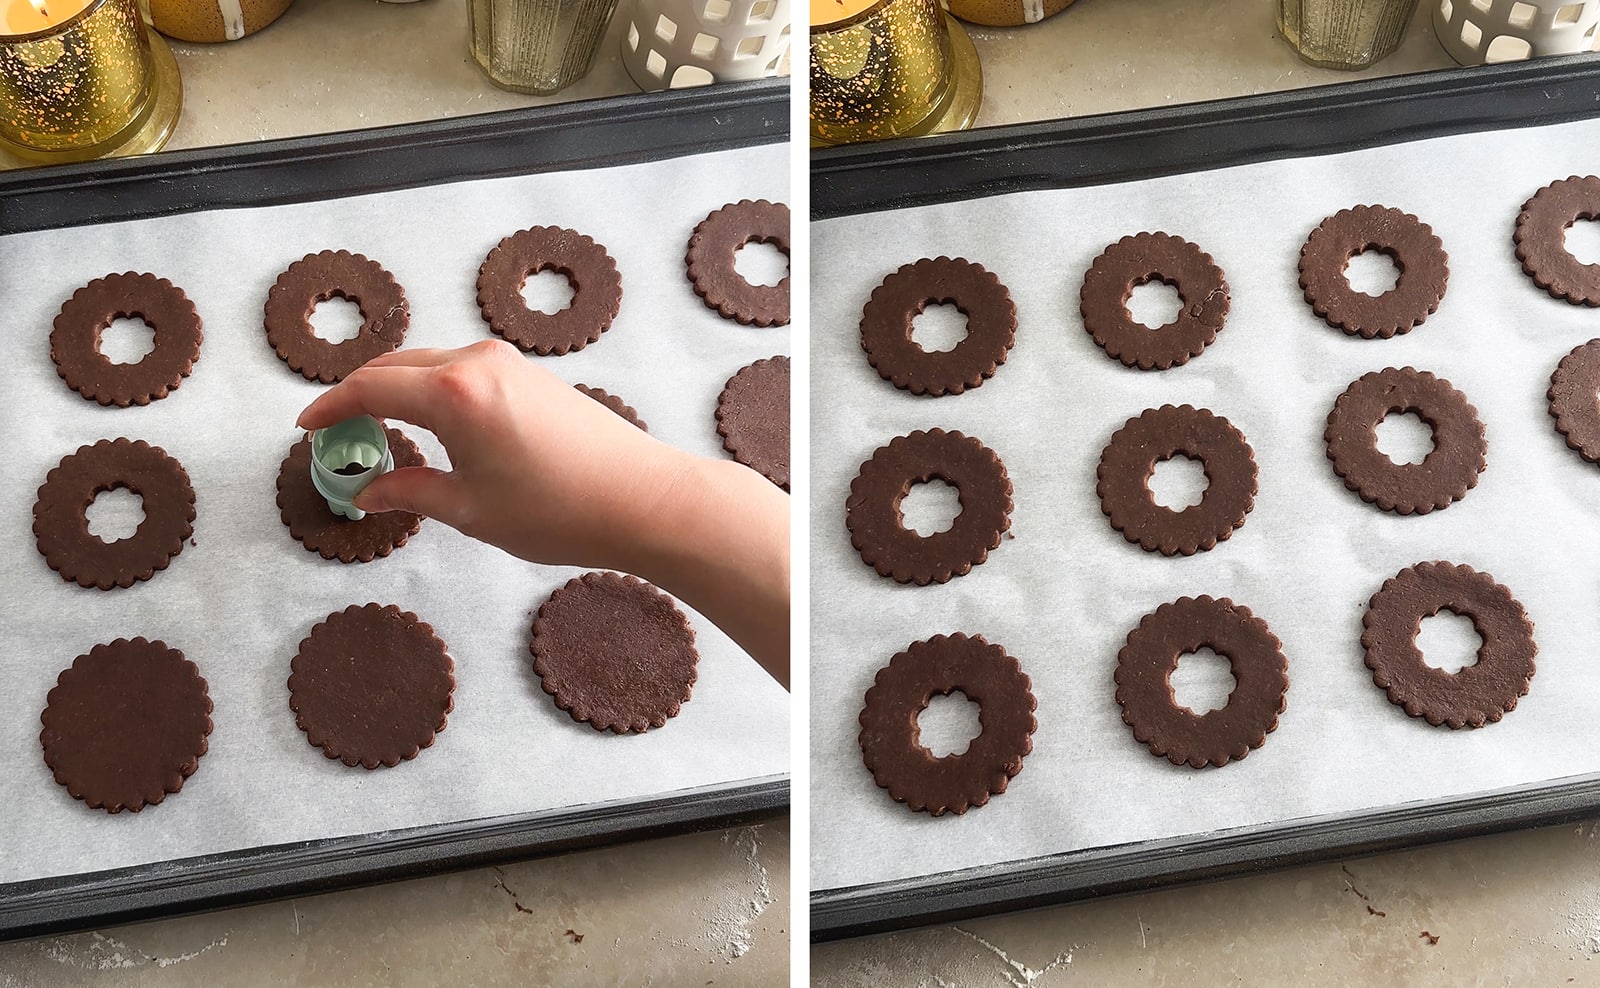 Left to right: cutting out the middle of cookies with a small cookie cutter, linzer cookie tops on a baking sheet.